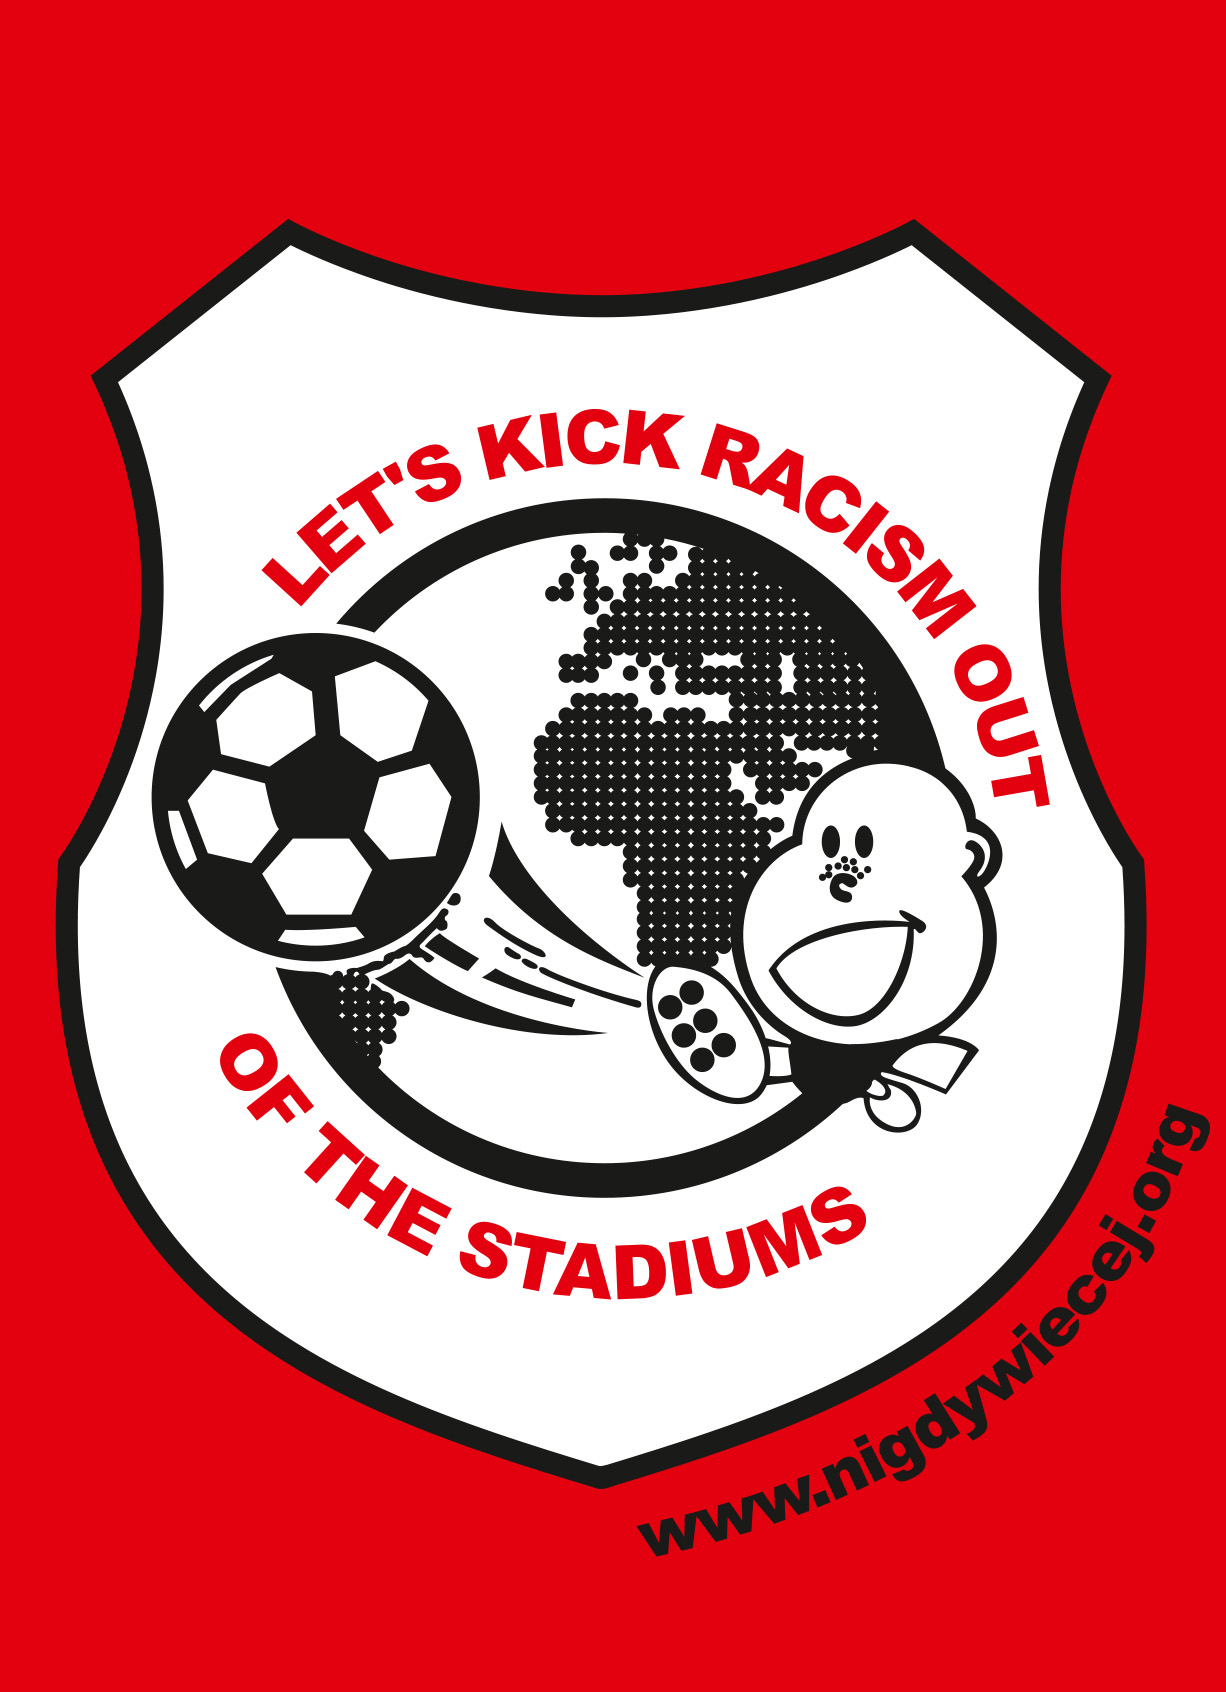 Let’s kick racism out of the stadiums